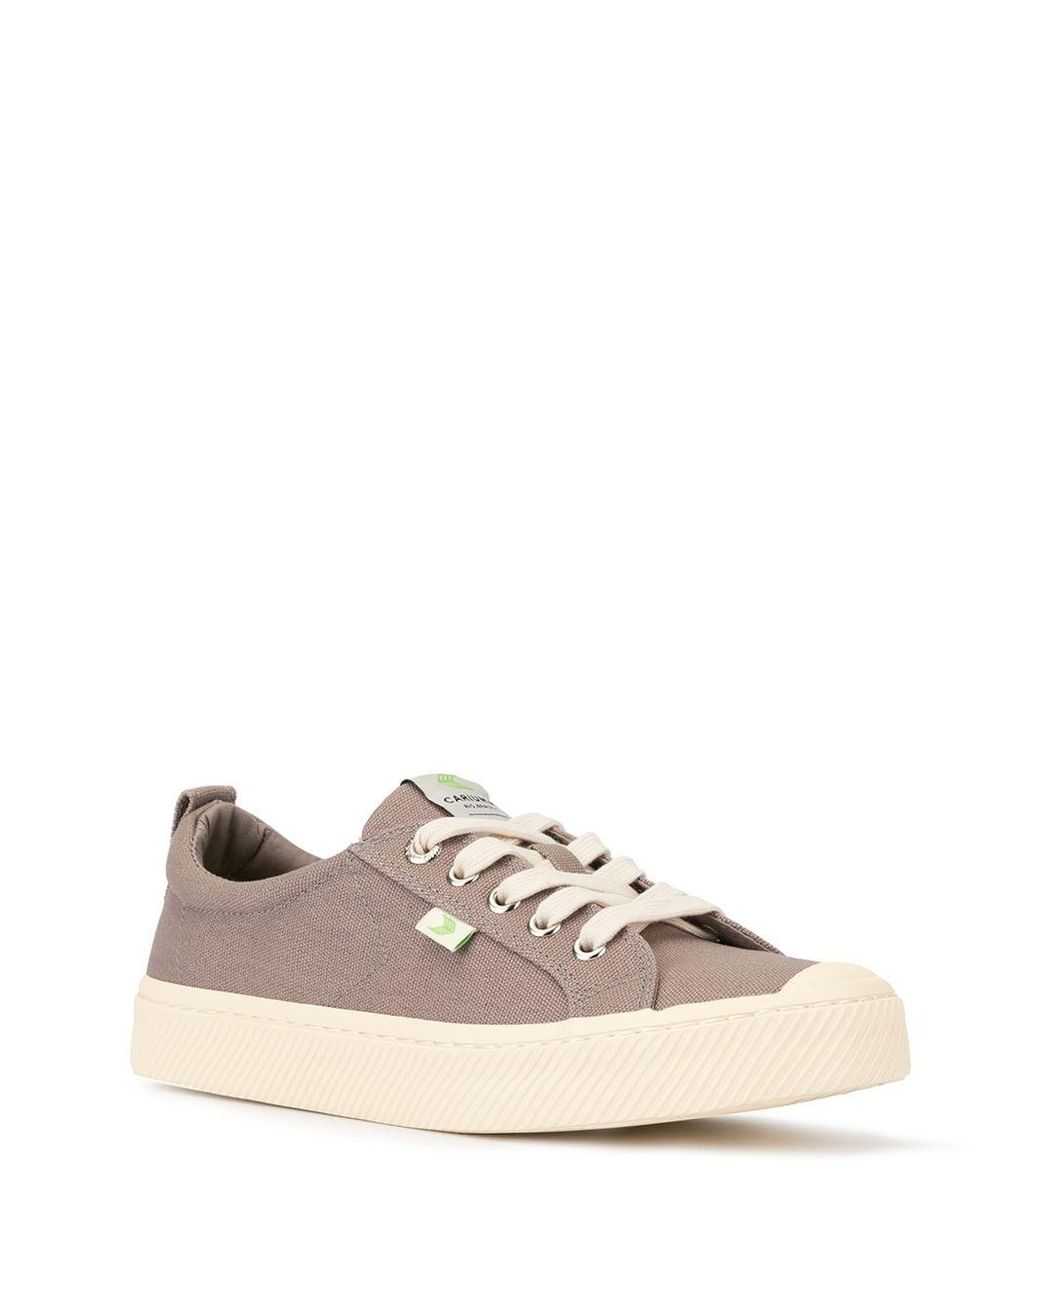 meline sneakers lord and taylor